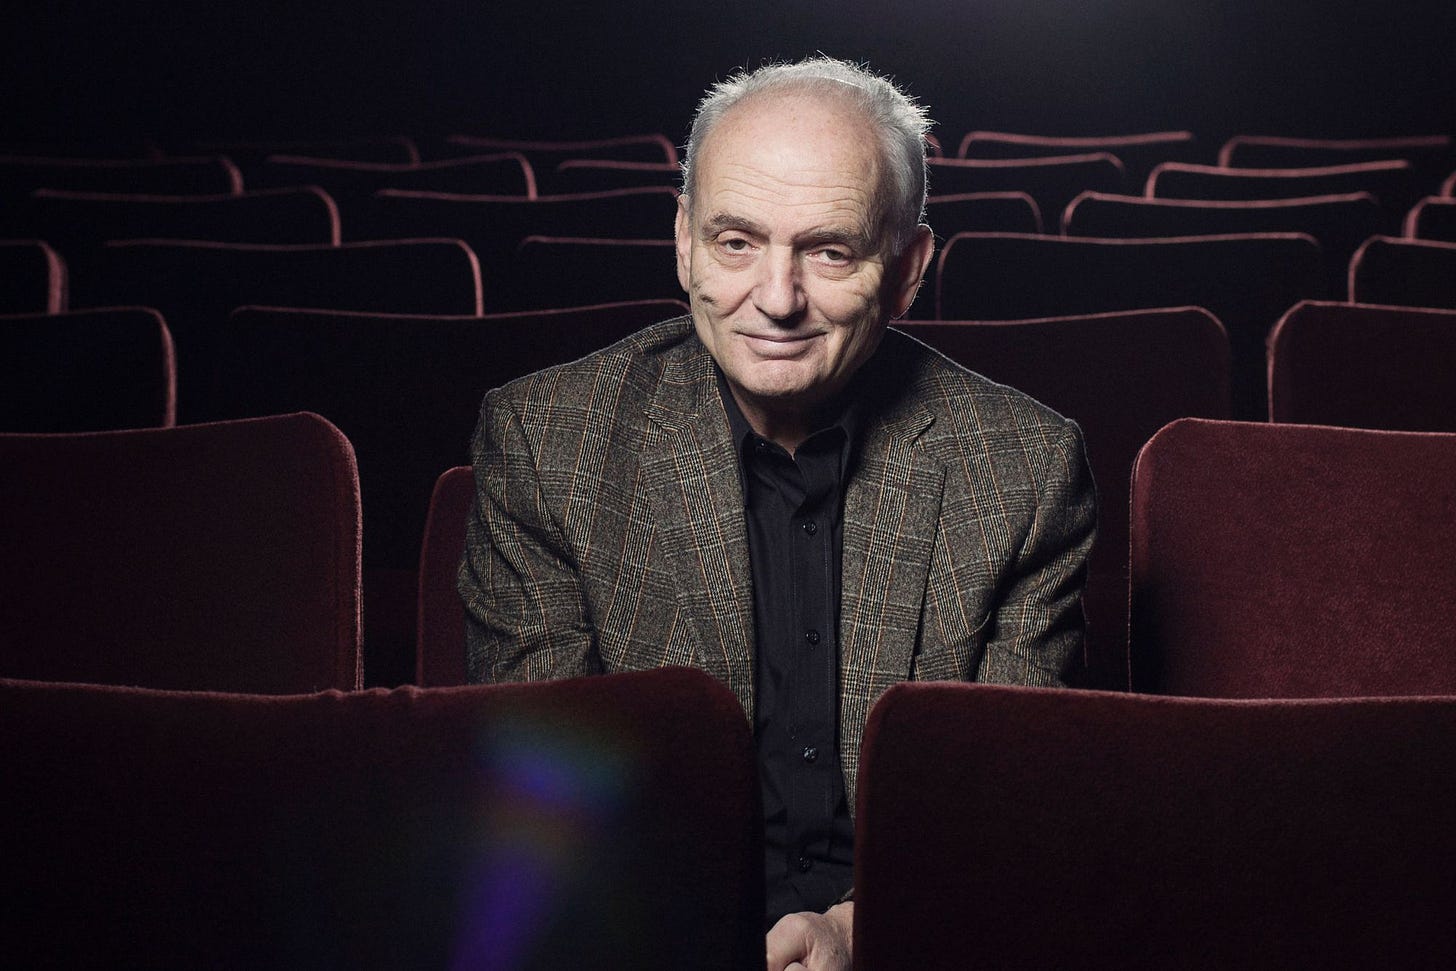 David Chase didn't like the Sopranos movie. And he wants to make another one.